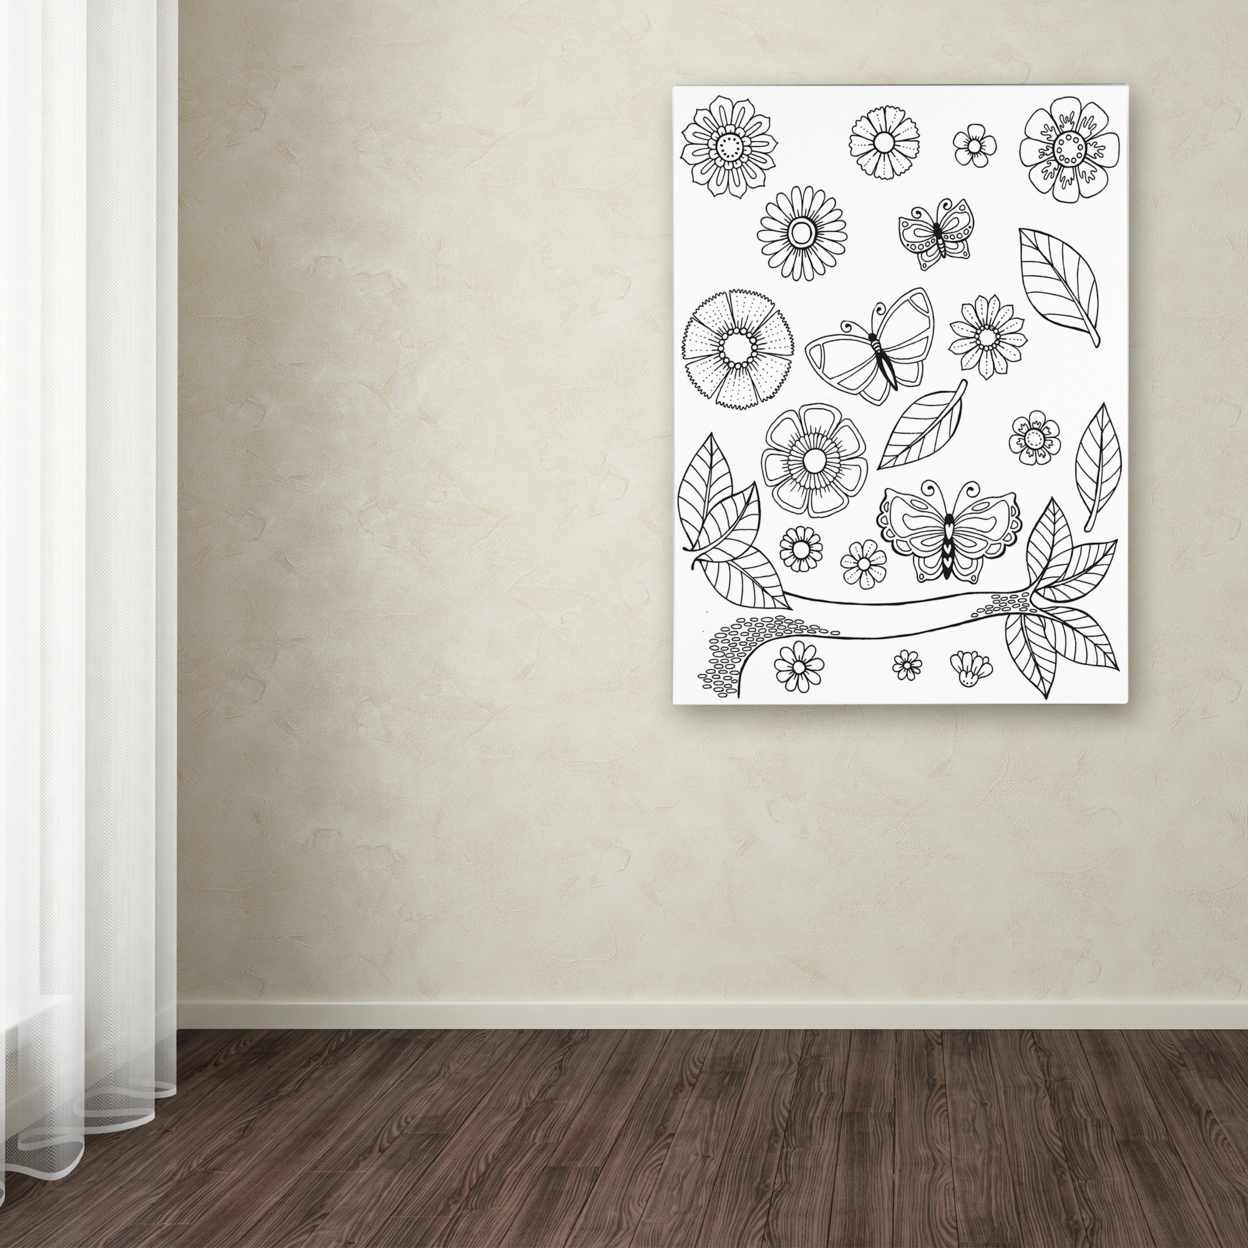 Hello Angel 'Flowers Butterflies & Leaves' Canvas Wall Art 35 X 47 Inches